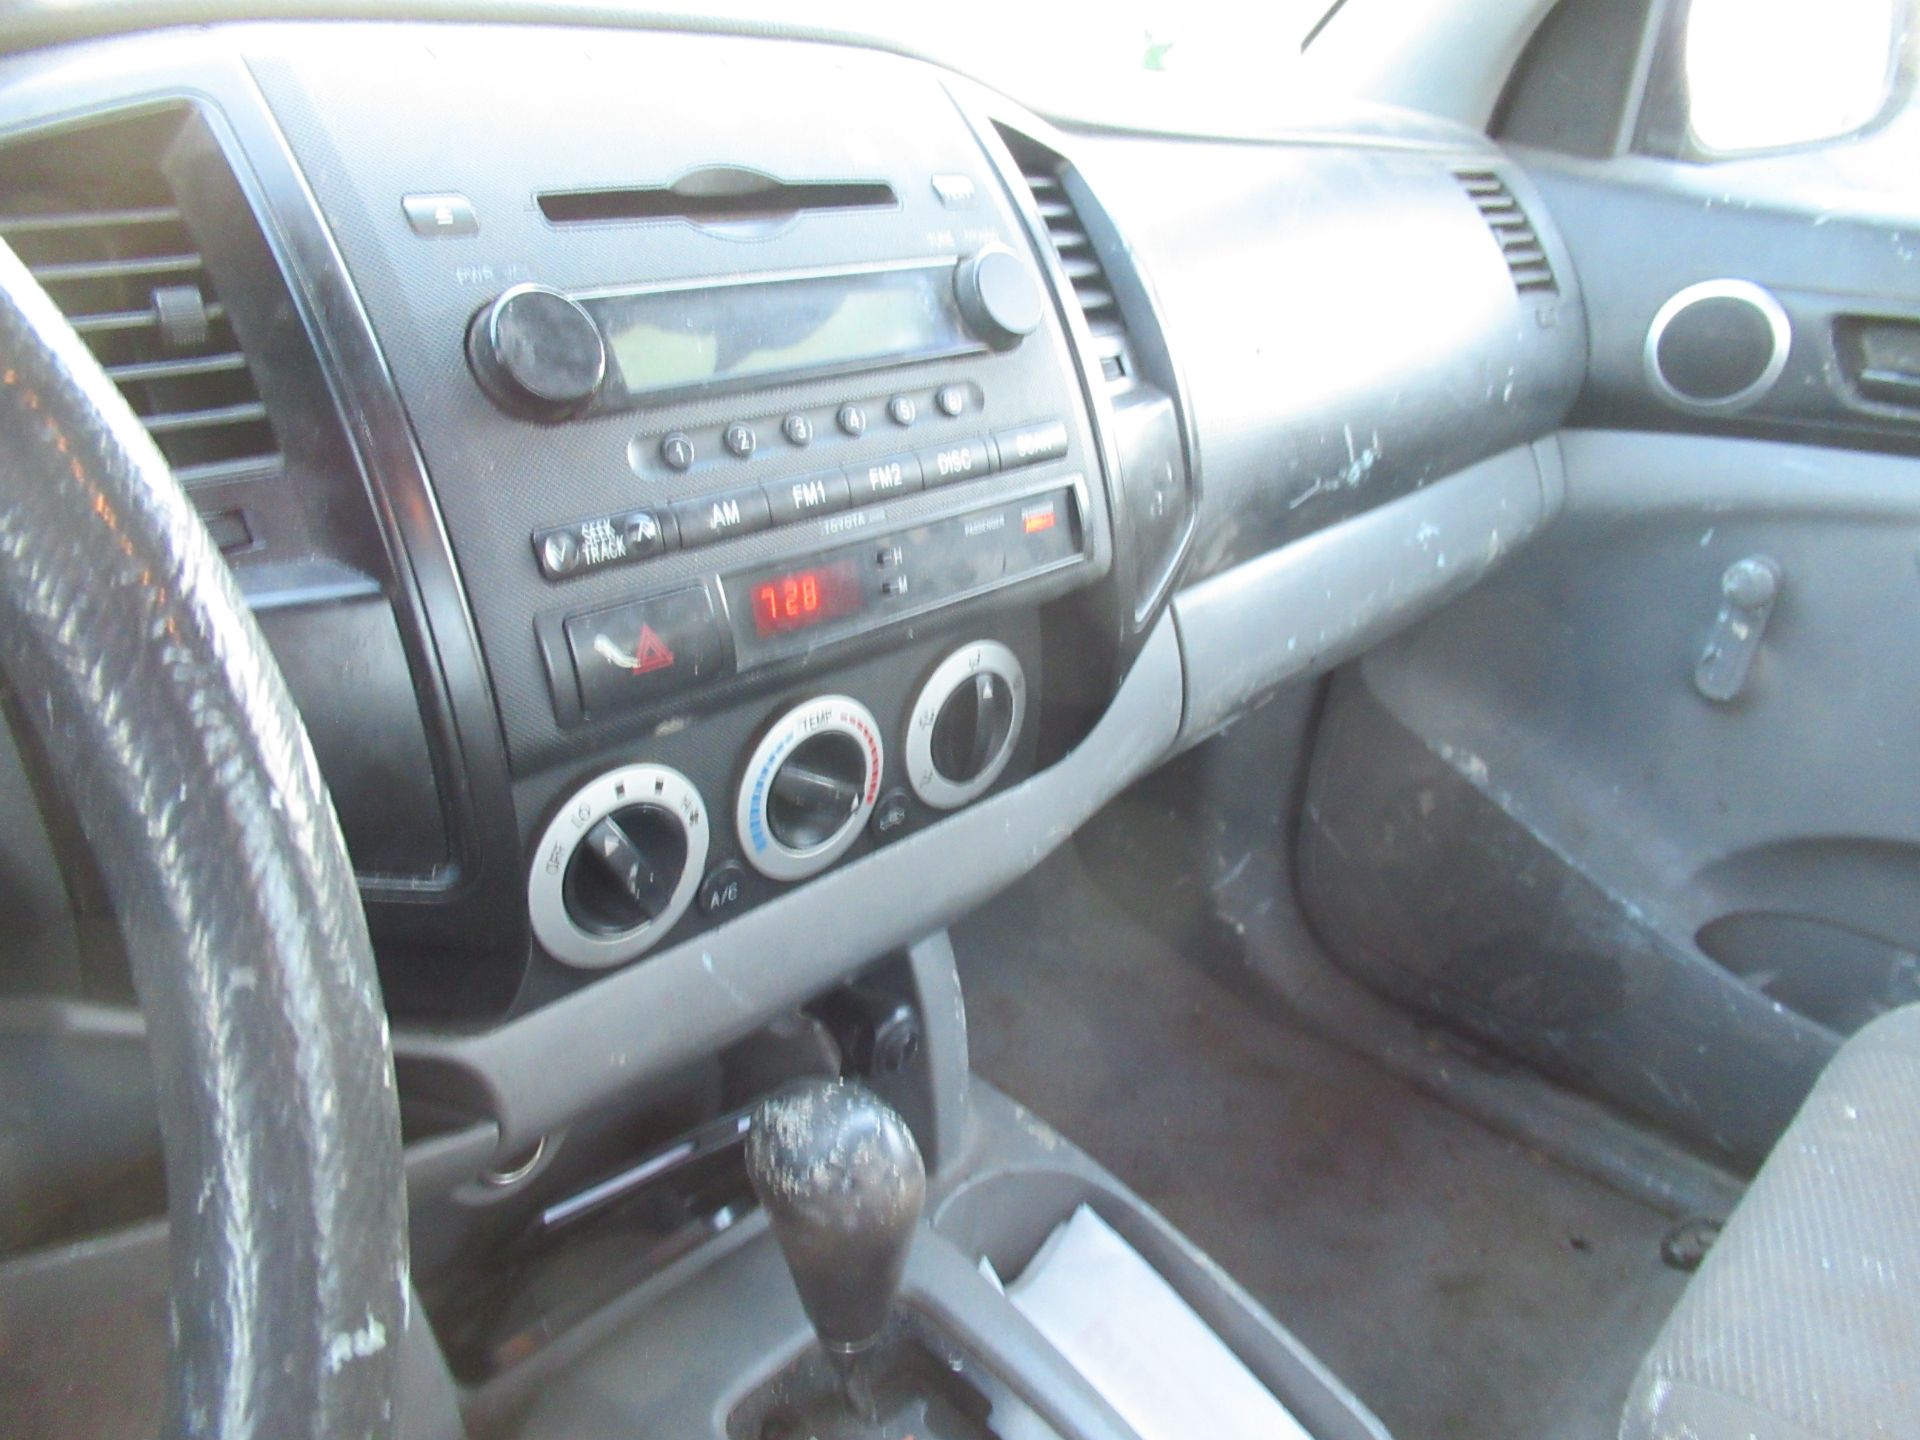 2008 TOYOTA TACOMA PICKUP TRUCK, AUTOMATIC, WITH APPROXIMATELY 105,732 MILES, VIN: 5TENX22N382504186 - Image 6 of 12